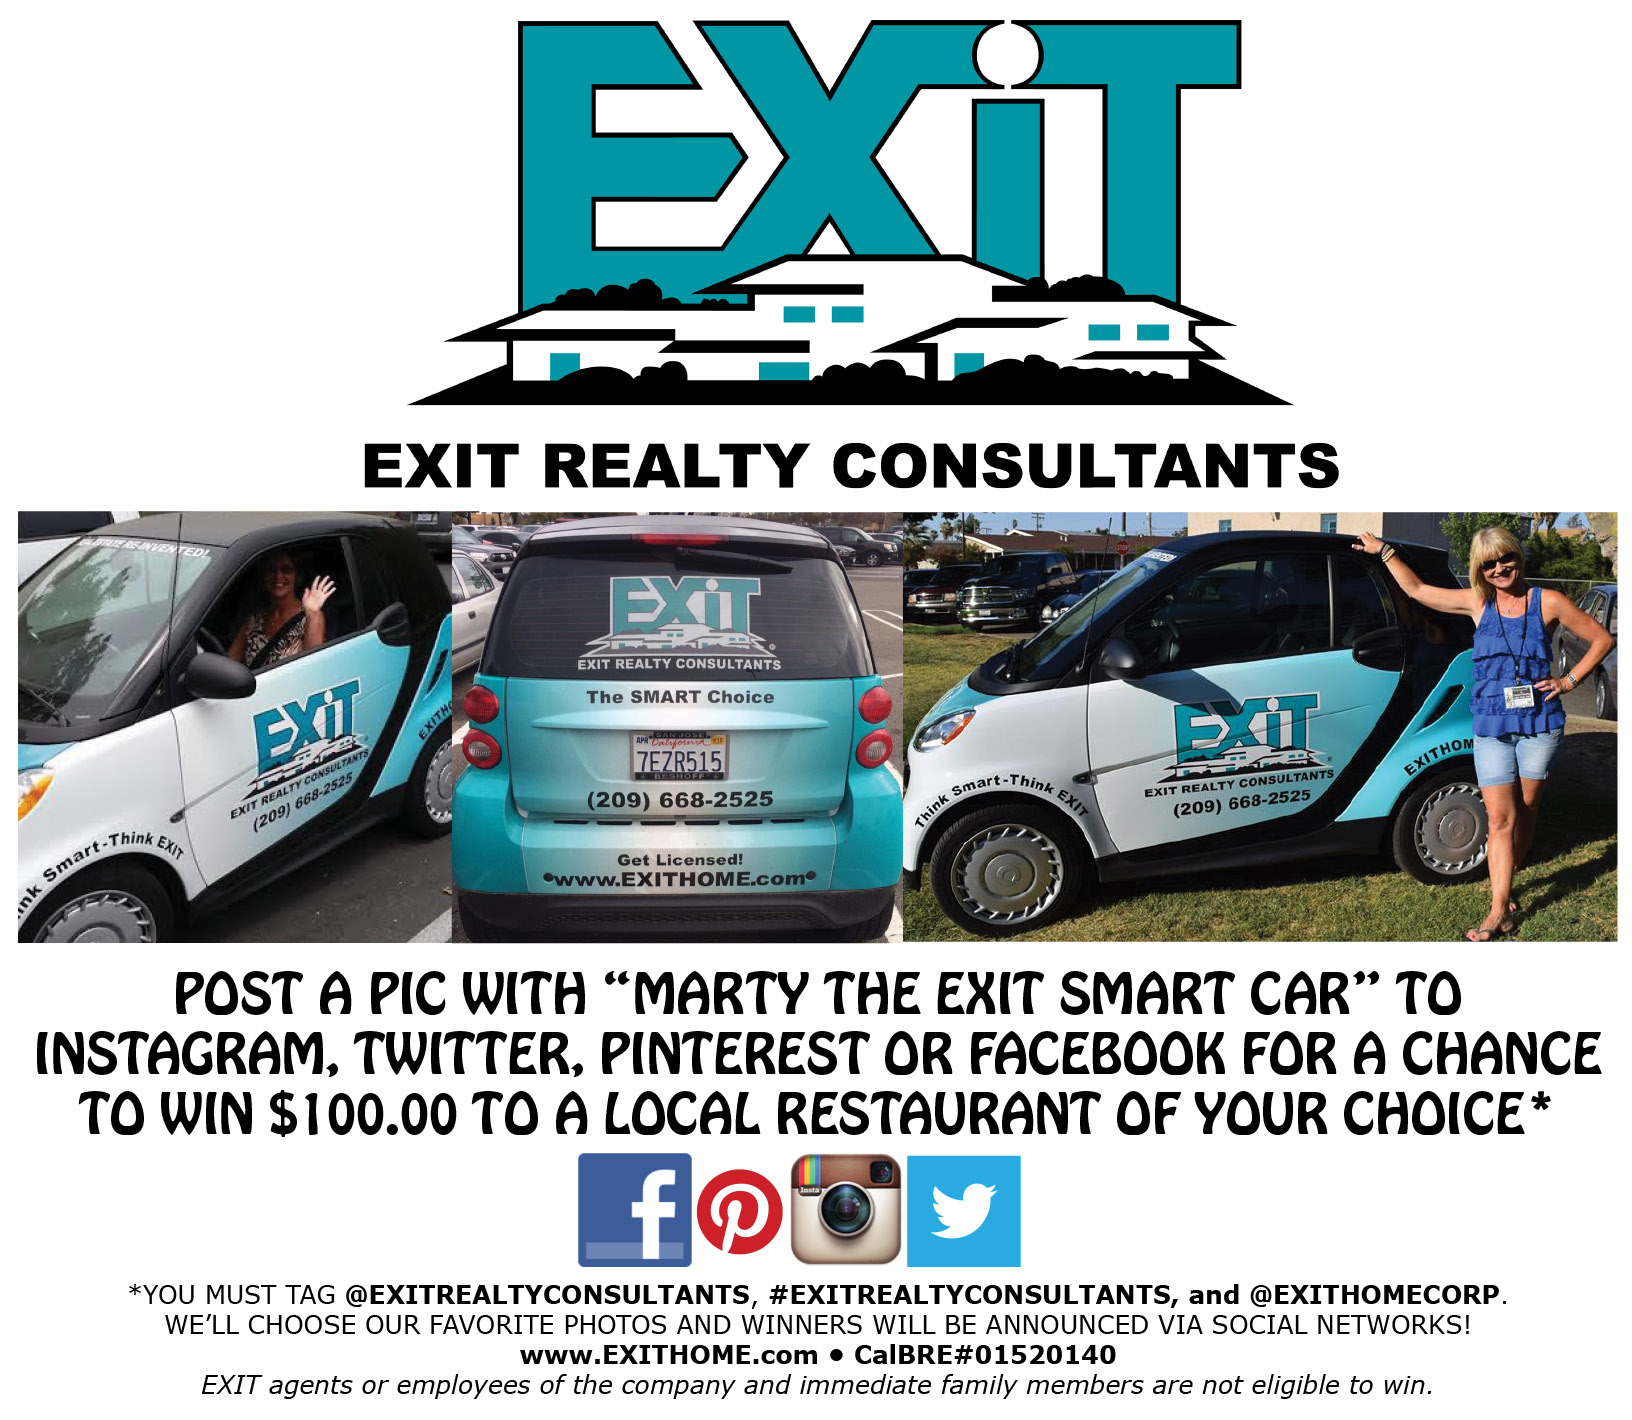 EXIT Realty Consultants Launches New Campaign!